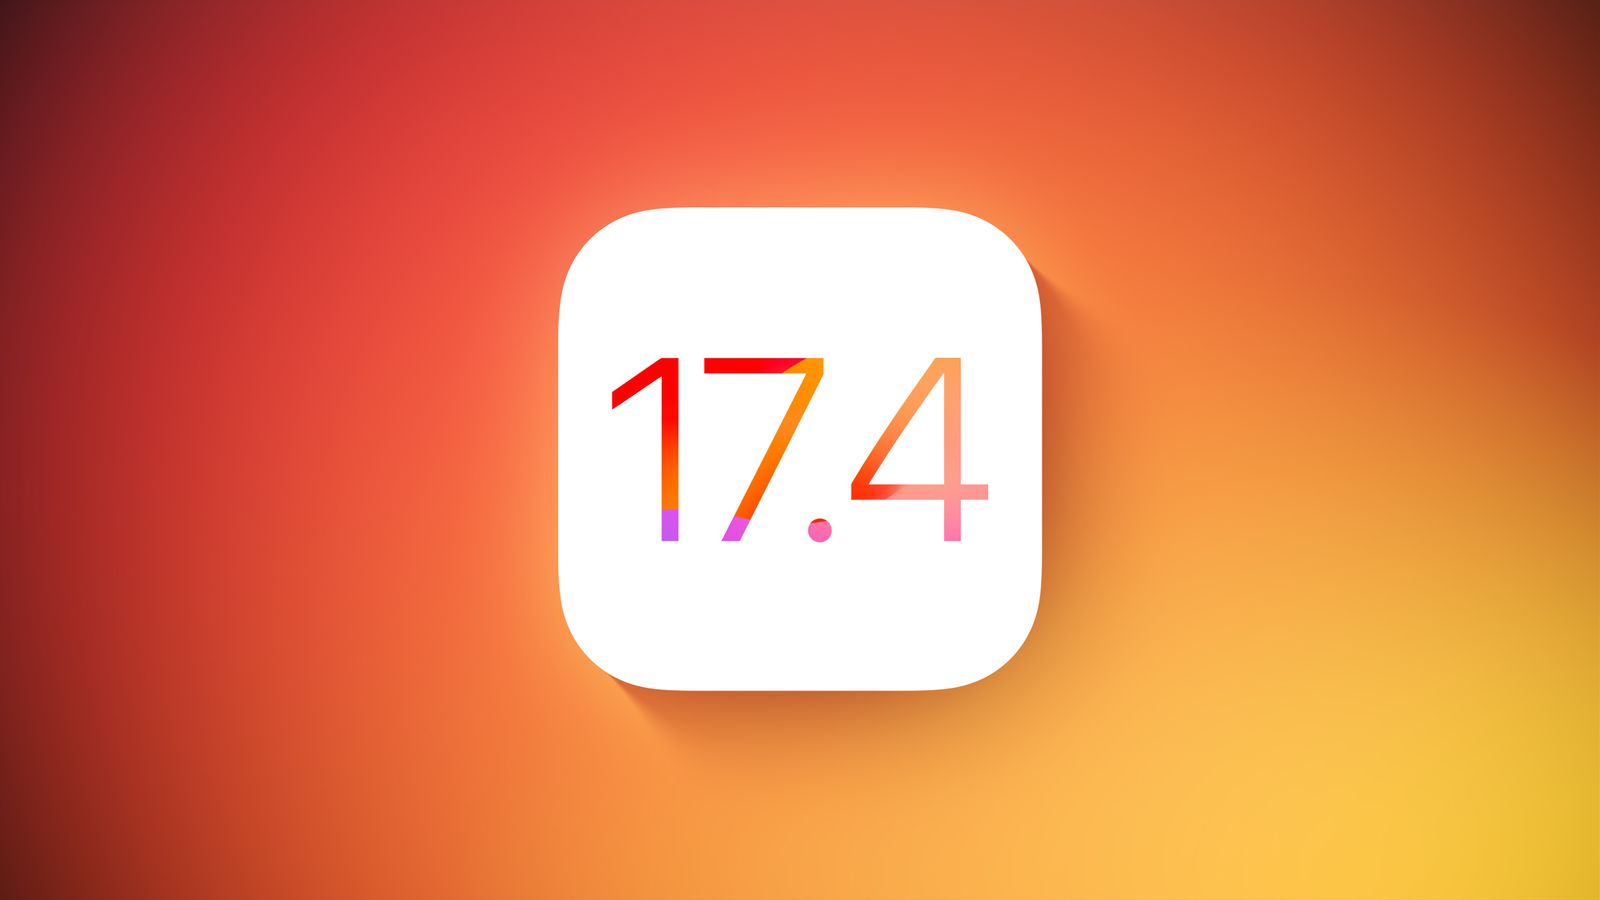 iOs 17.4 that supports third party apps is out in Europe